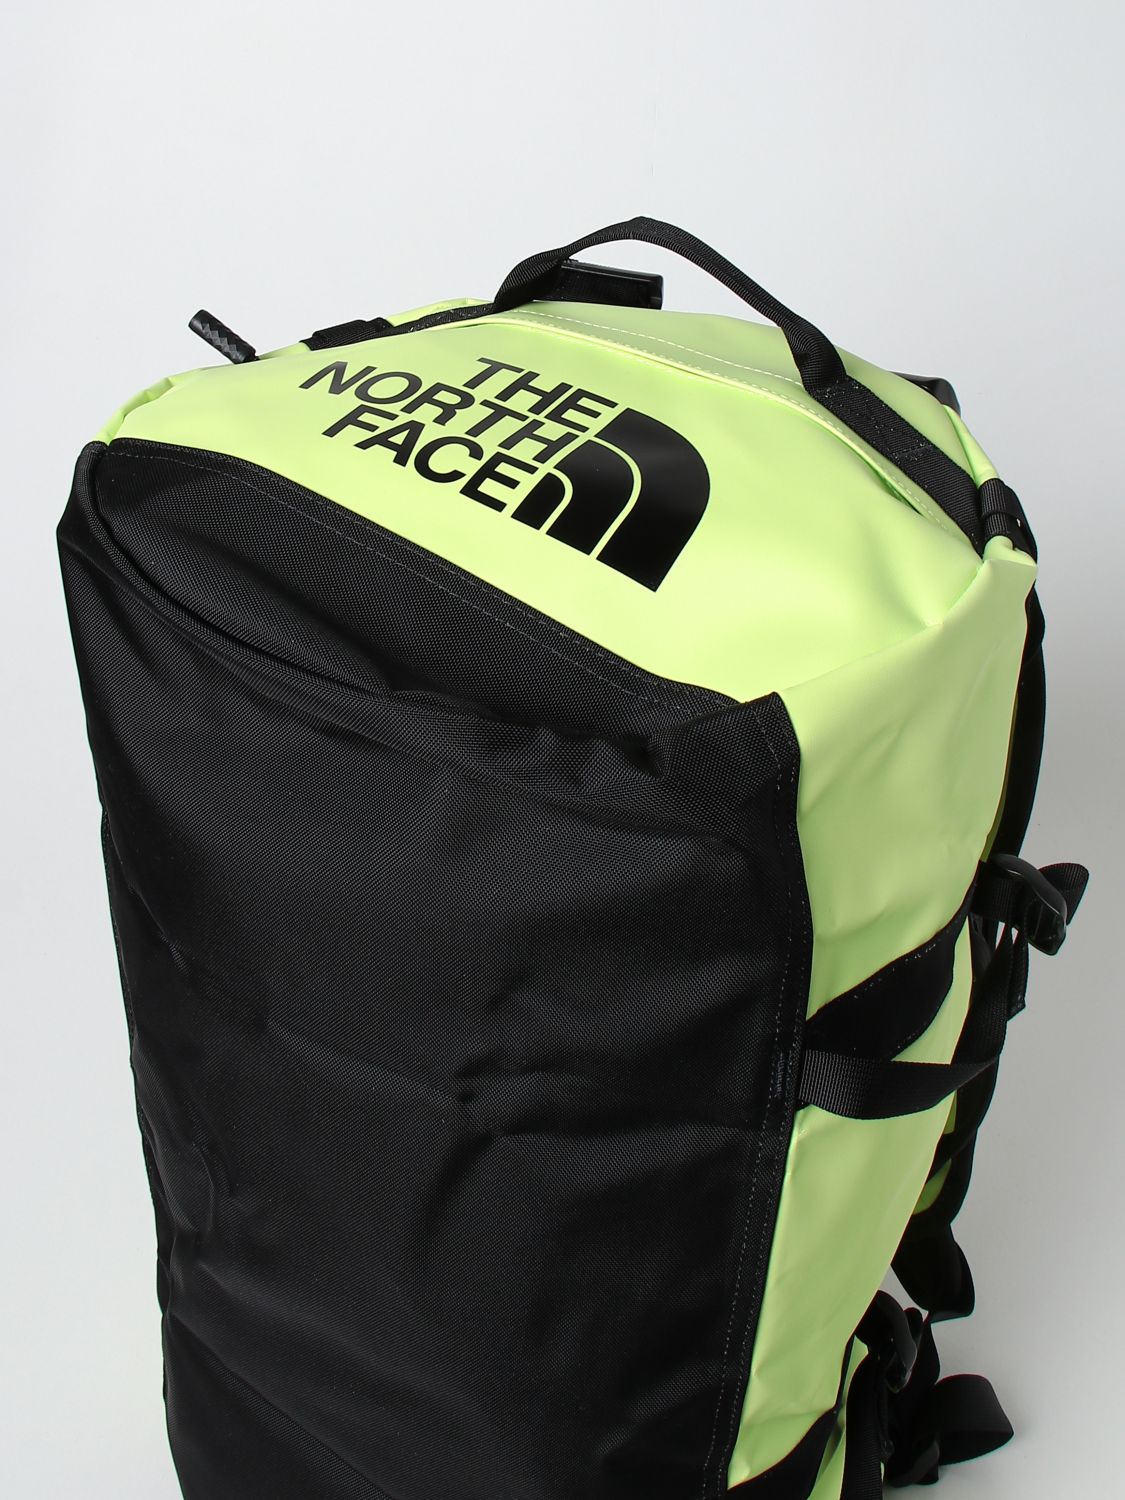 Sac à dos The North Face: Sac homme The North Face vert 3